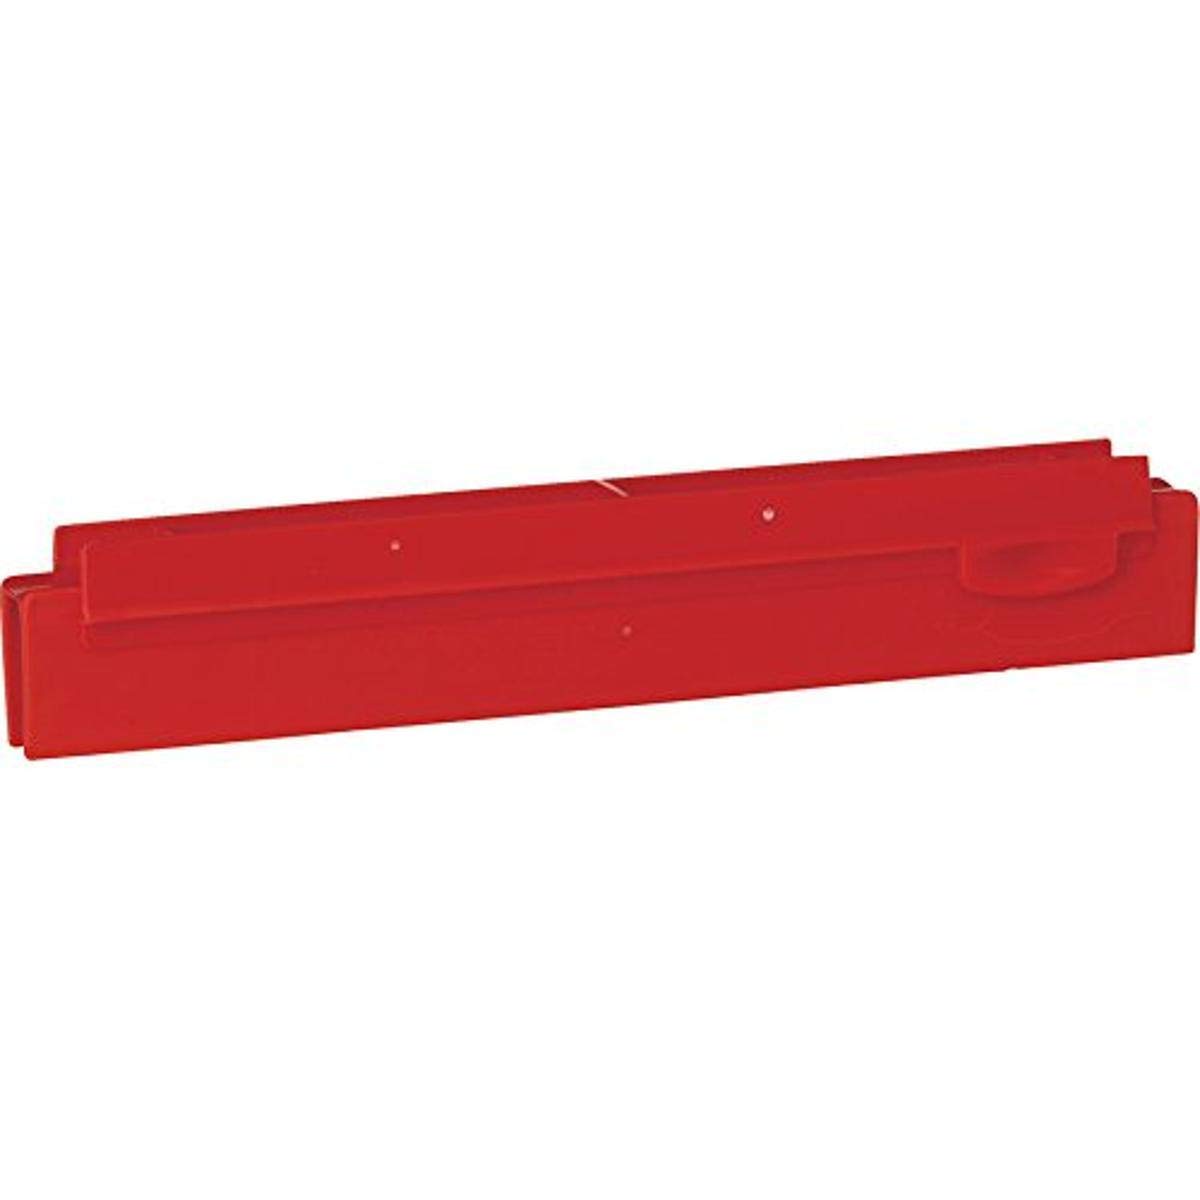 Vikan 77314 Rubber Double Hygienic Squeegee Blade, 10", Red